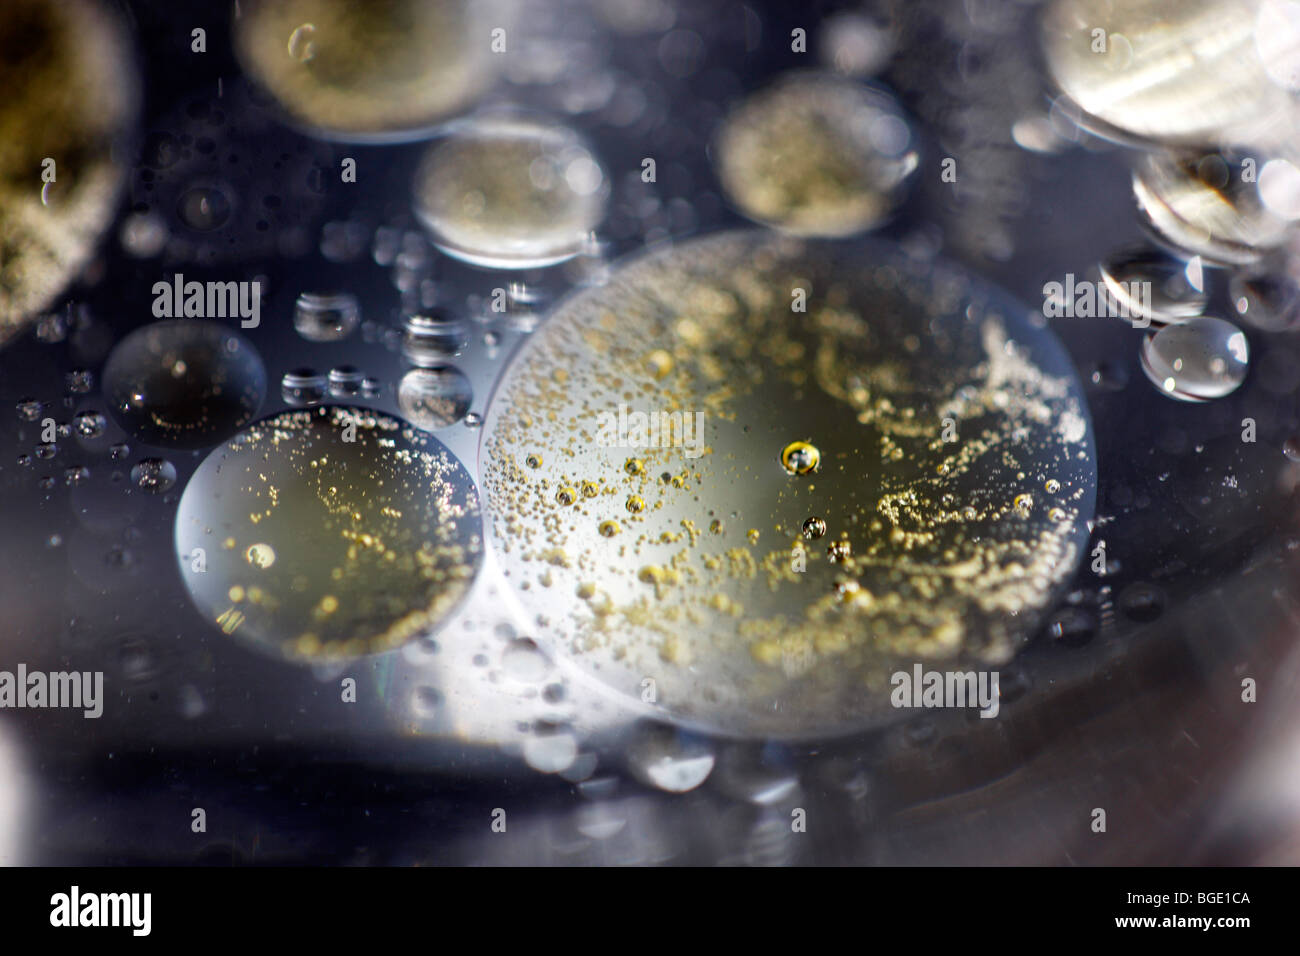 blisters in a fluid, emulsion. Stock Photo